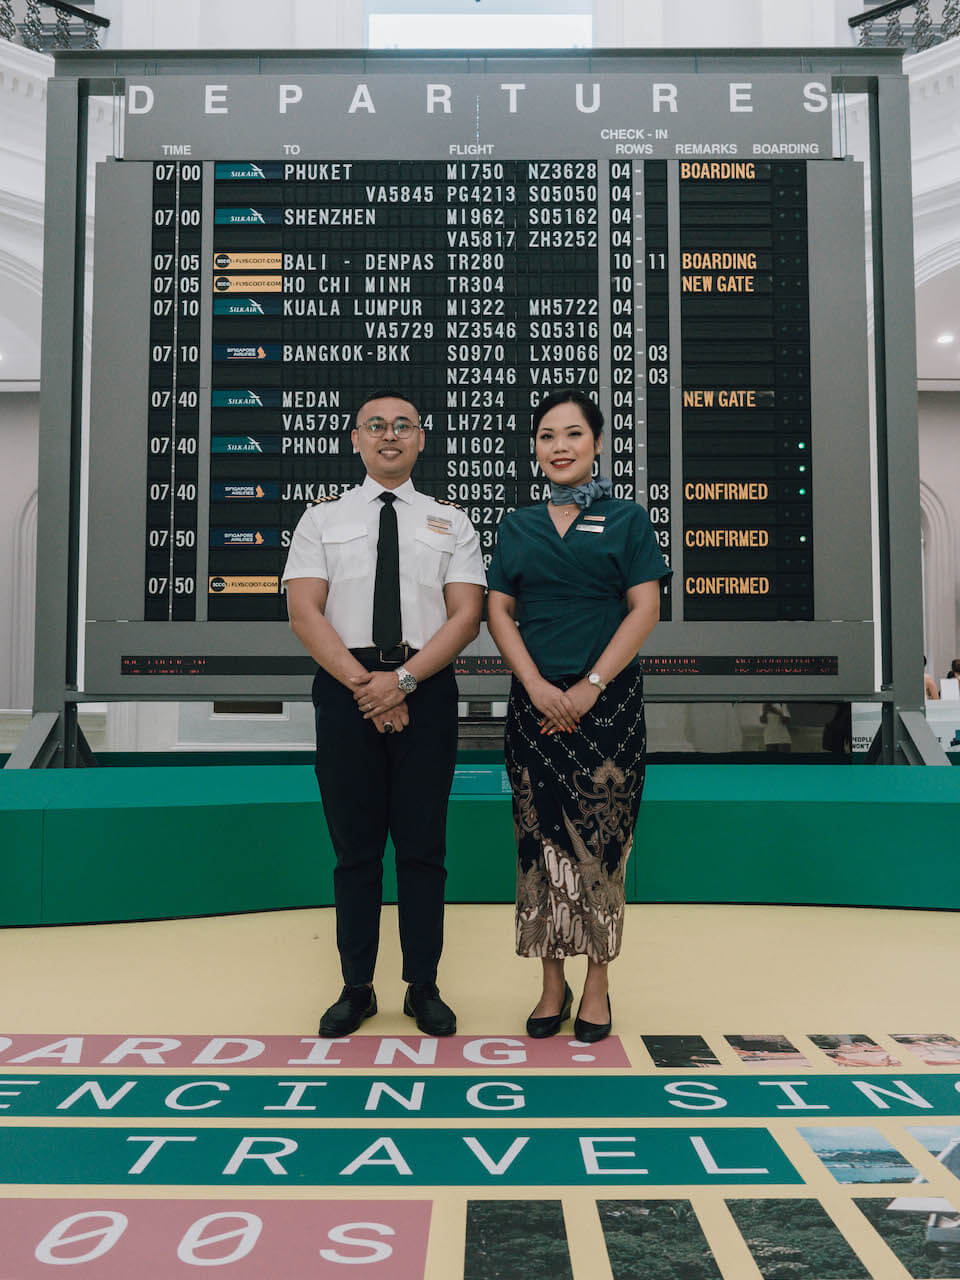 two uniformed staff – a man and a woman – stand before the solari board at the now boarding travel exhibition